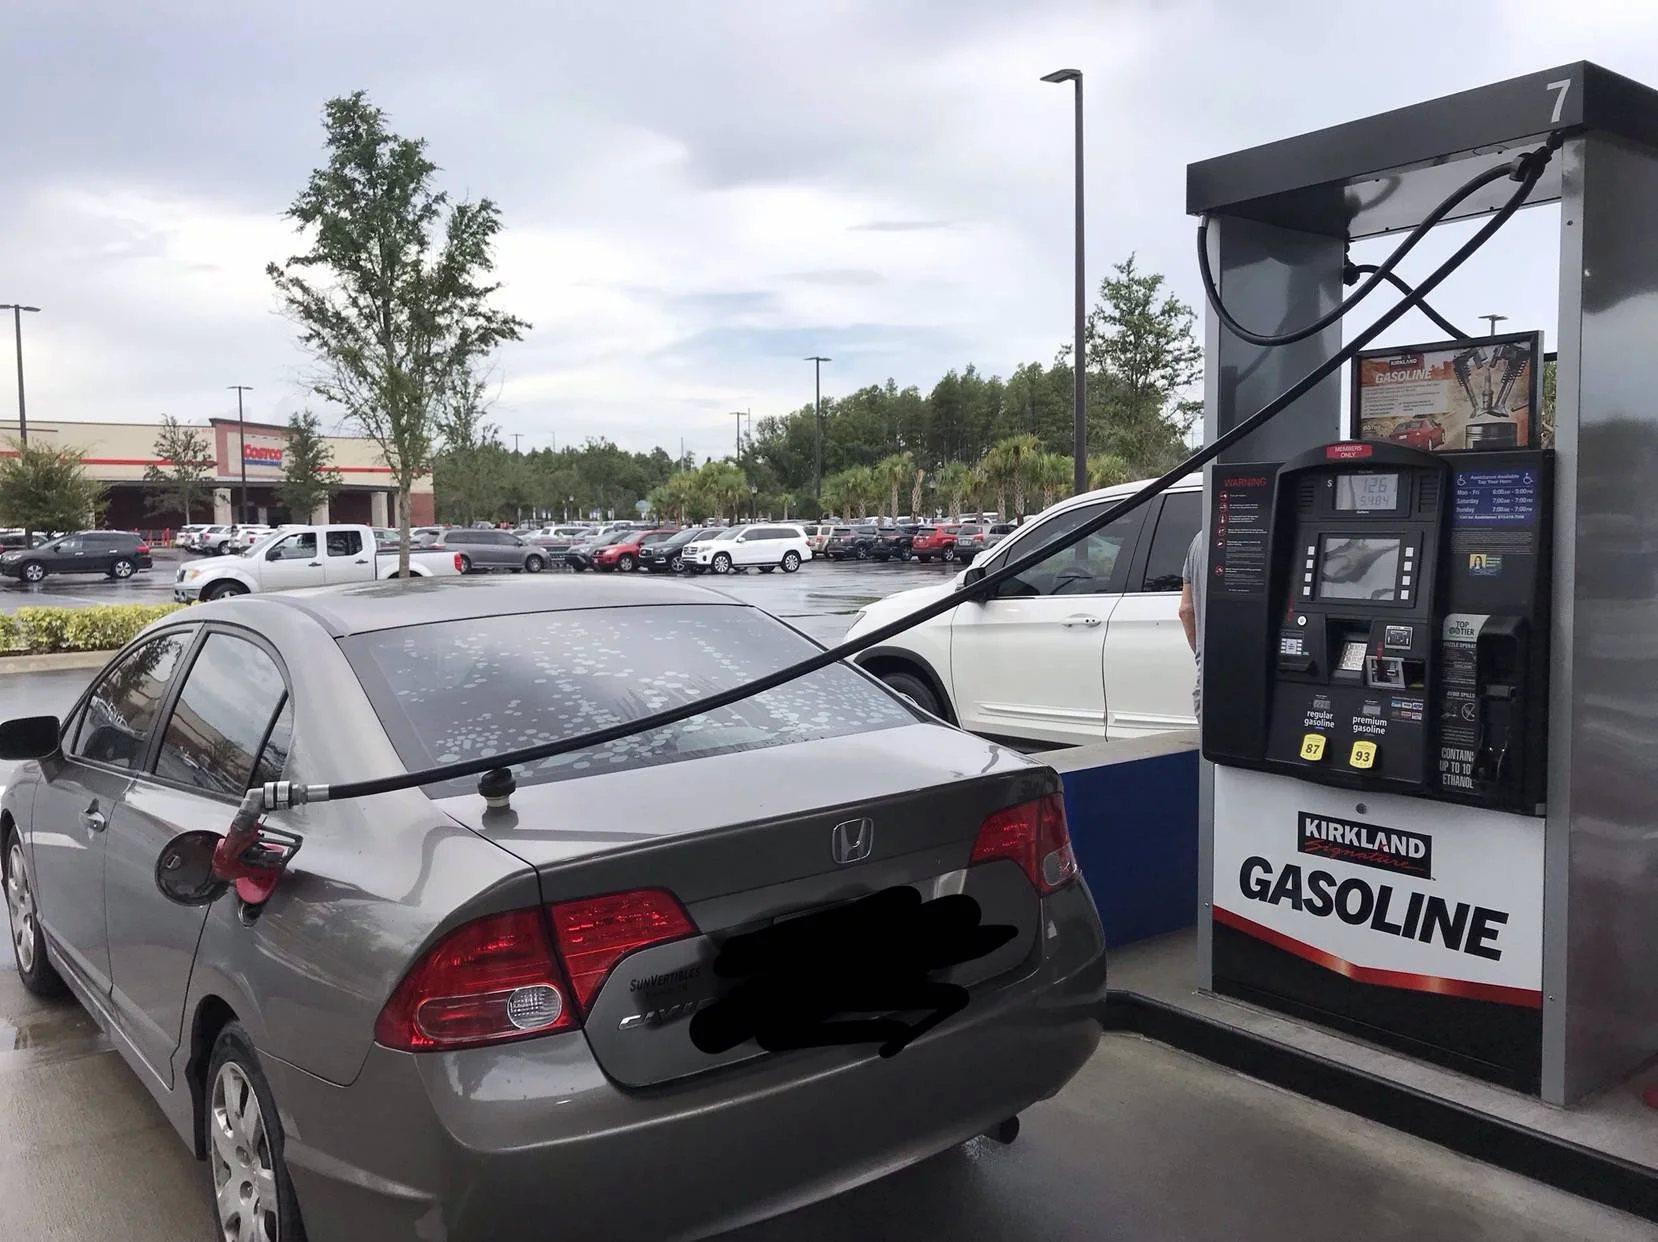 Reddit user ministerman posted this photo of a car with the license plate obscured to demonstrate the extra length of the pump hoses at Costco gas stations.